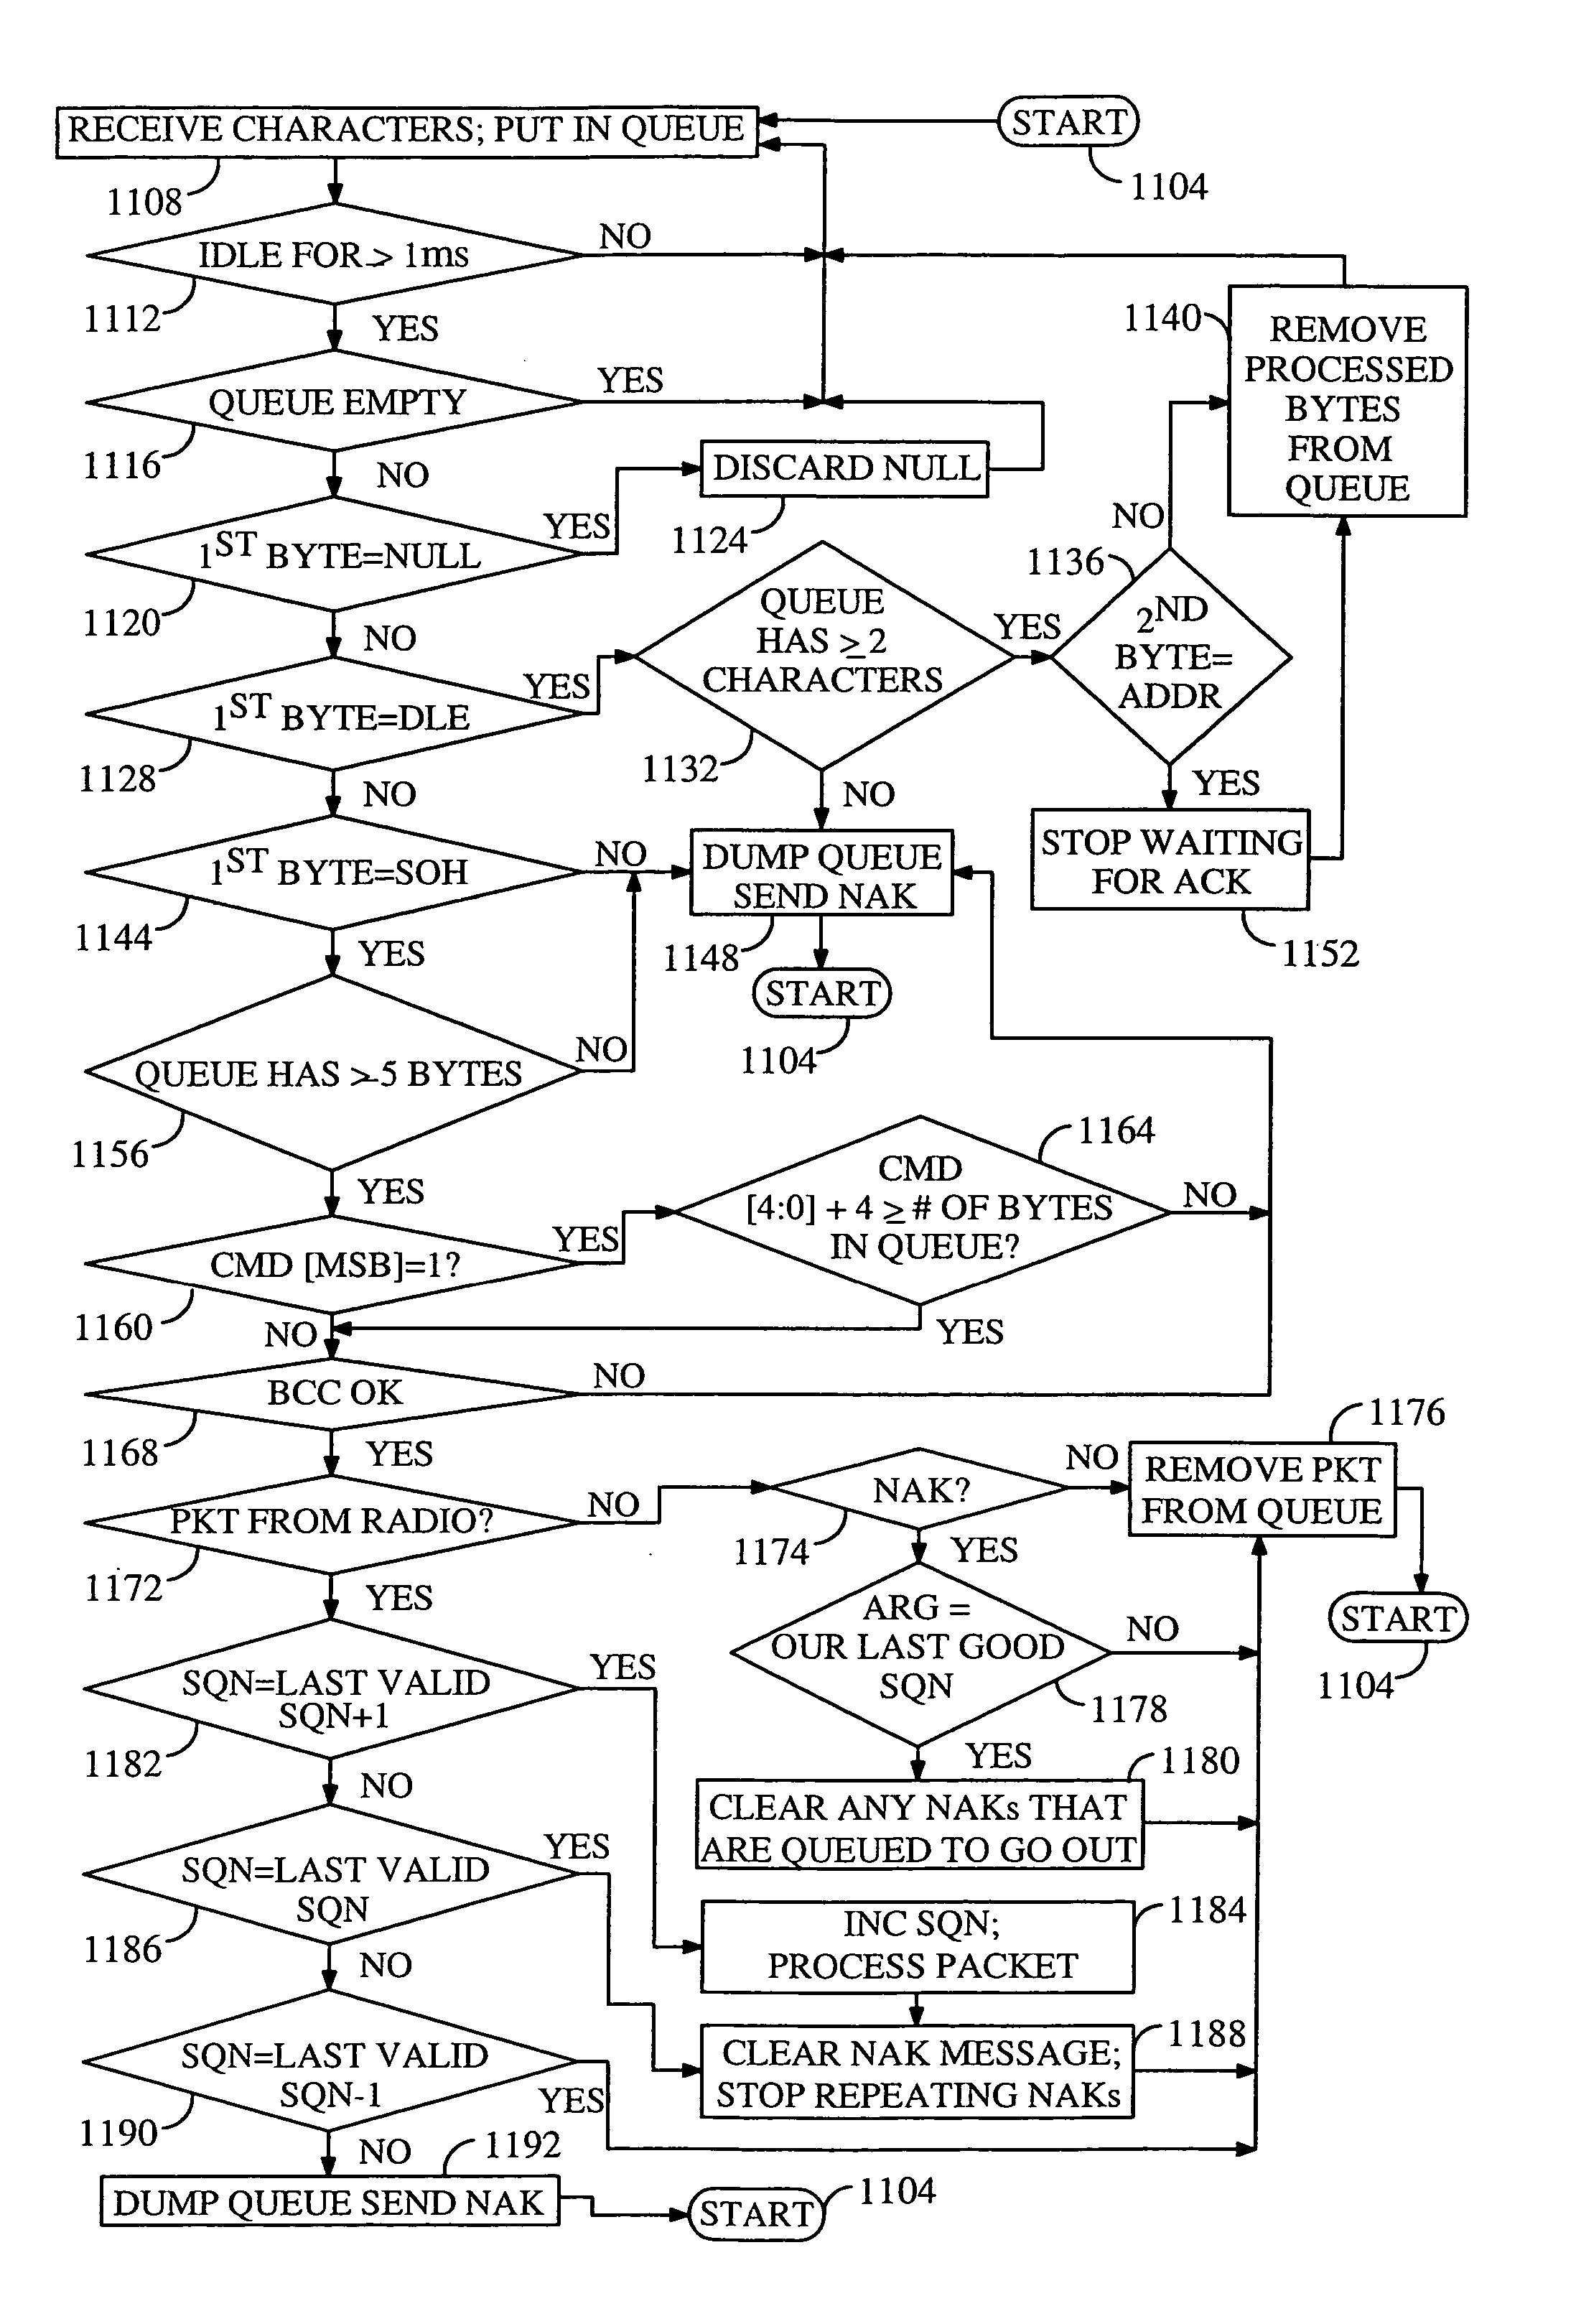 Control interface protocol for telephone sets for a satellite telephone system